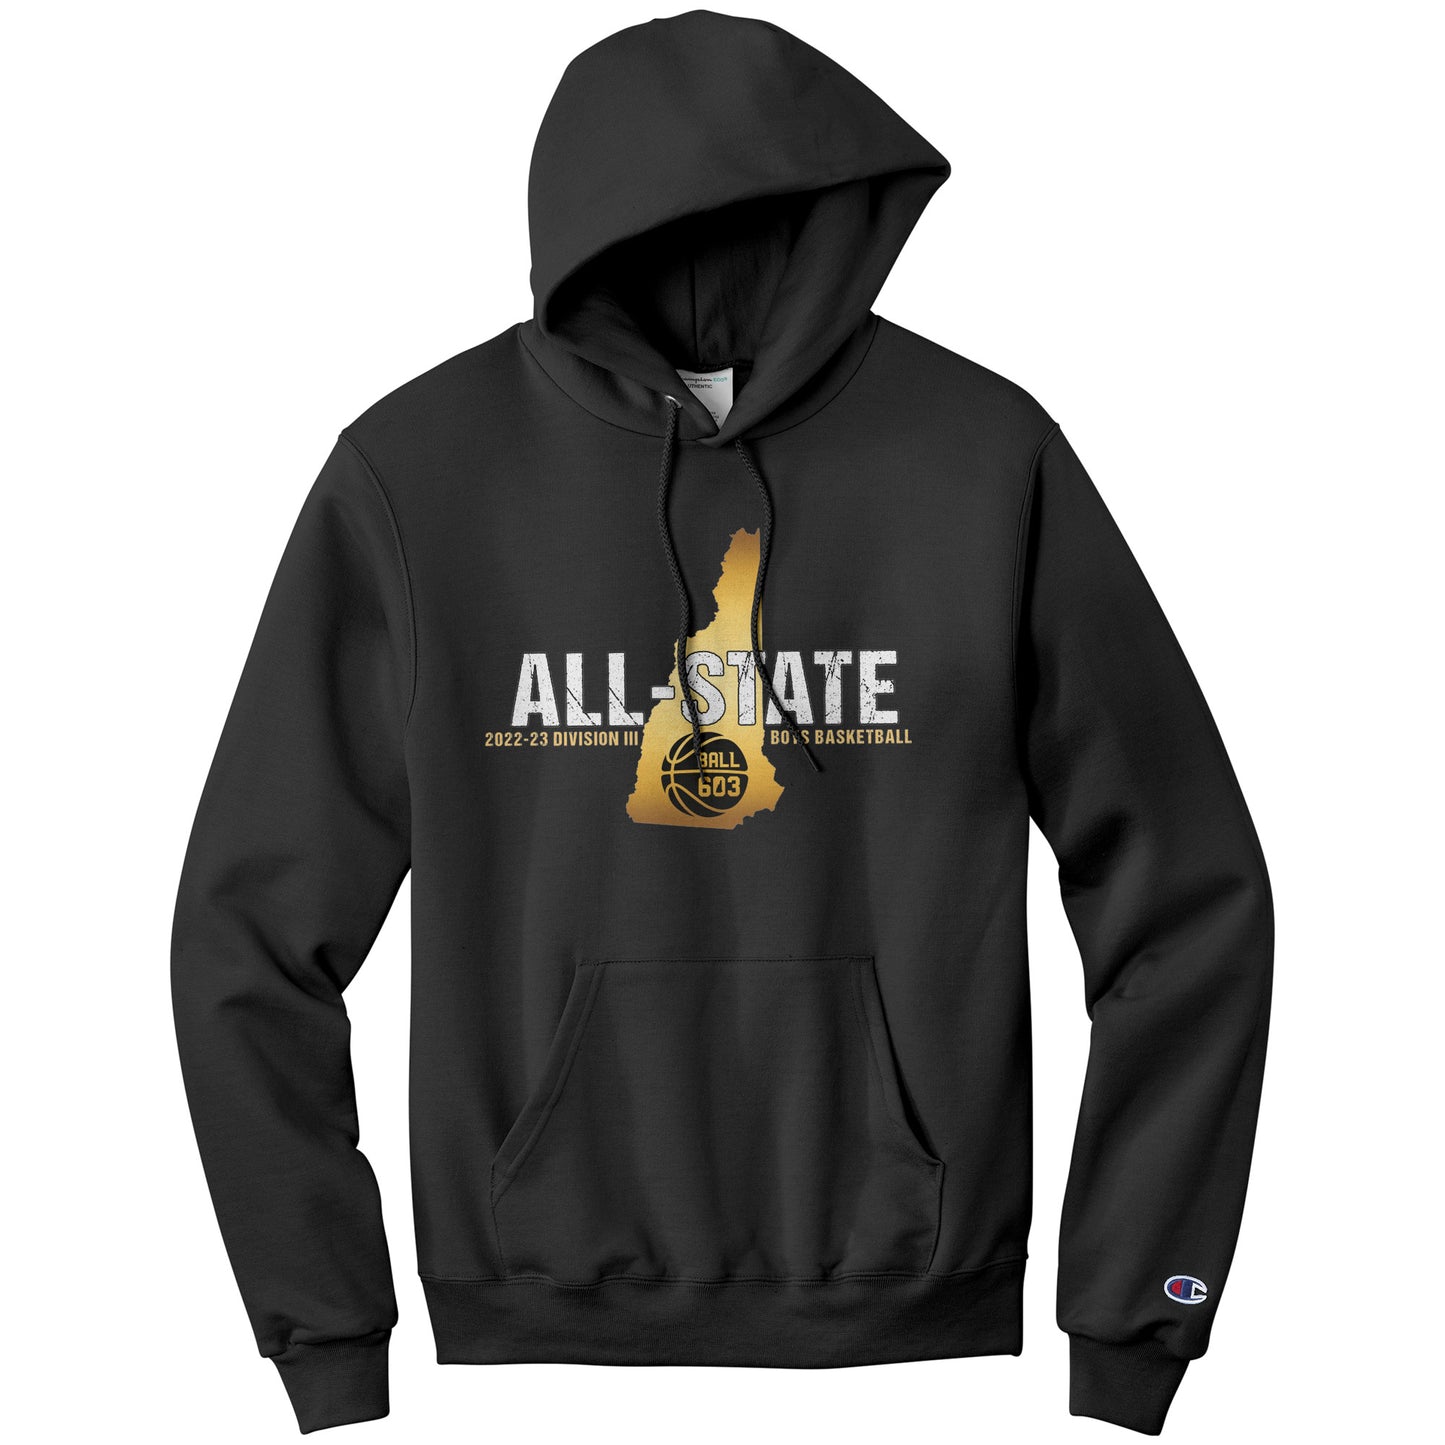 All-State D3 Boys: Champion Hoodie